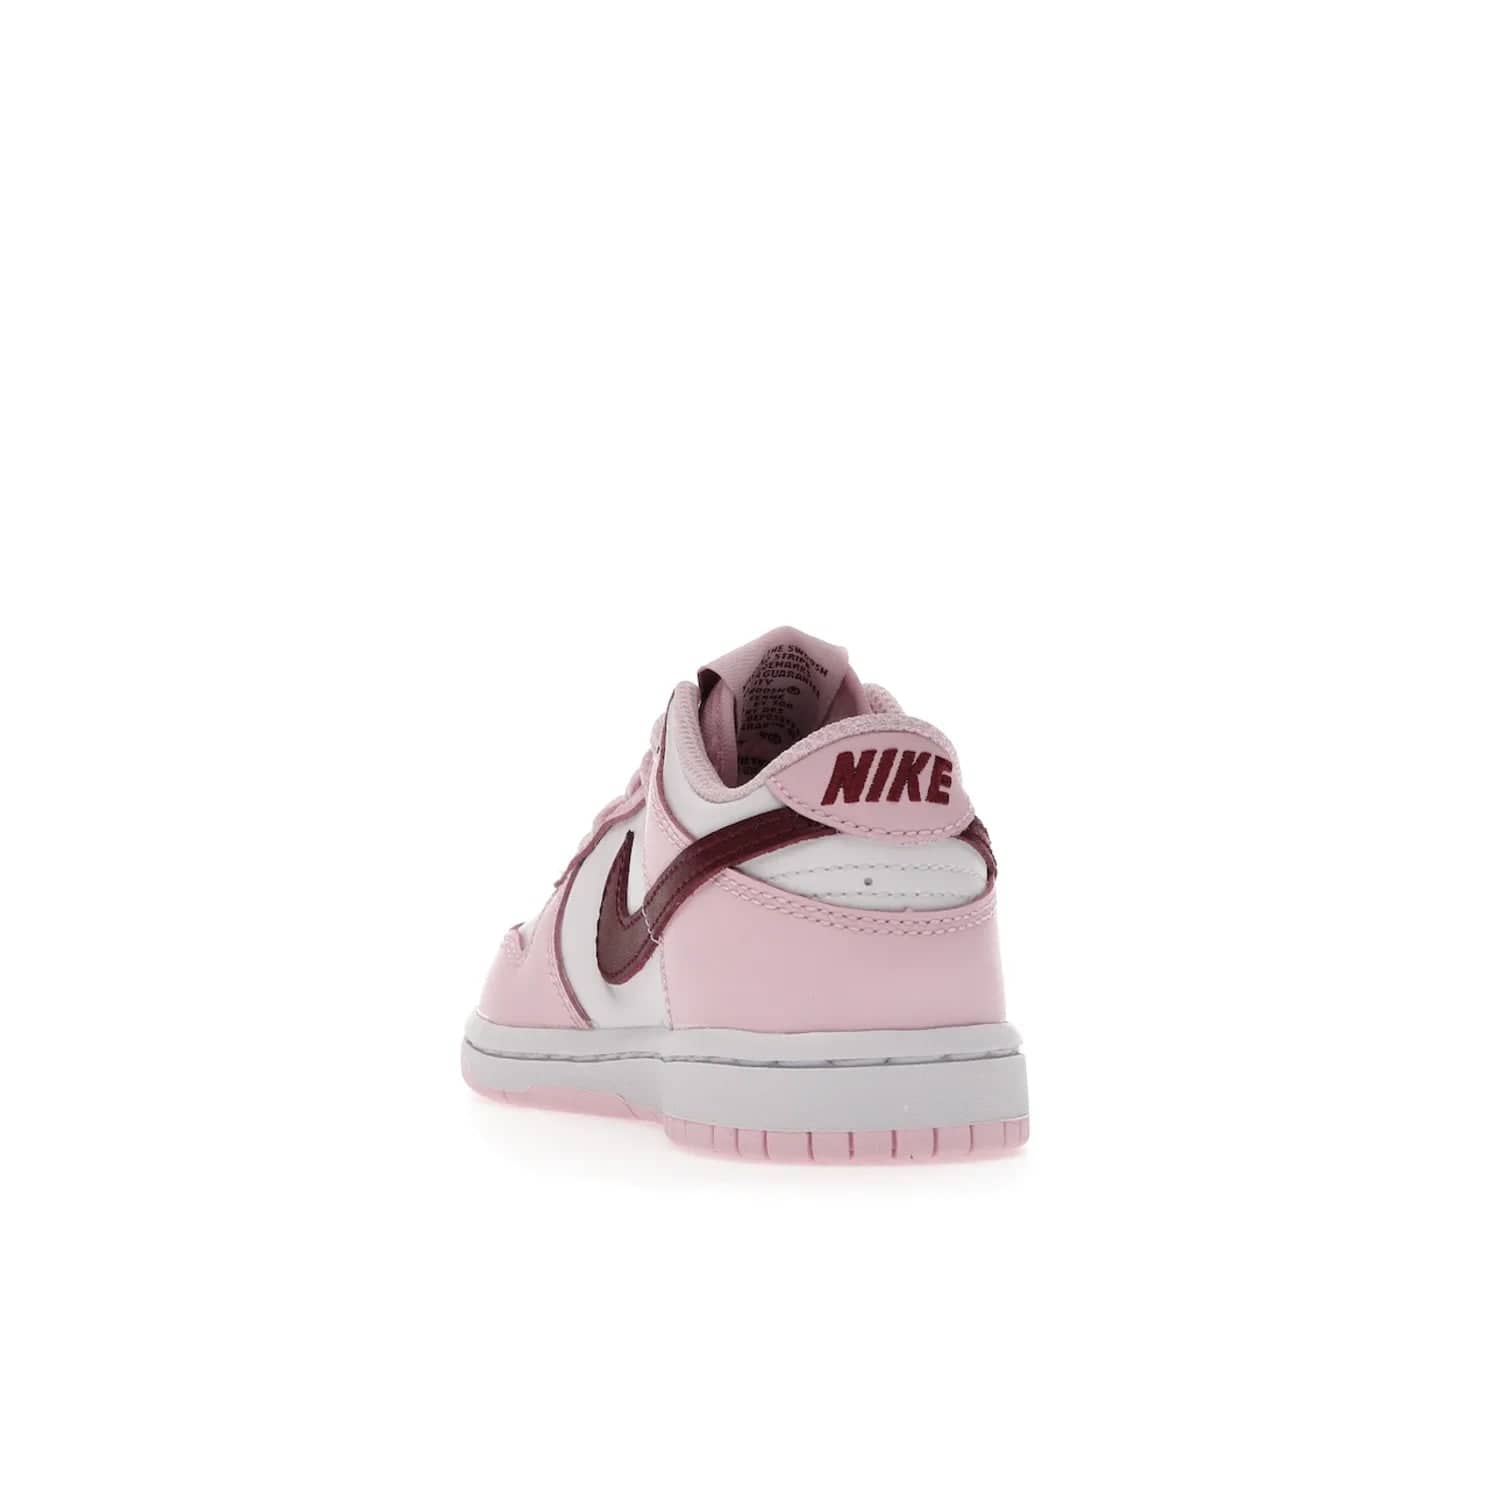 Nike Dunk Low Pink Red White (PS) - Image 26 - Only at www.BallersClubKickz.com - Introducing the Nike Dunk Low Pink Red White (PS), the perfect addition to your sneaker collection. A classic silhouette with modern vibrant colors, including a pink upper with red and white accents and a white midsole. Comfort and durability, perfect for any outfit. Limited edition, available June 22nd.